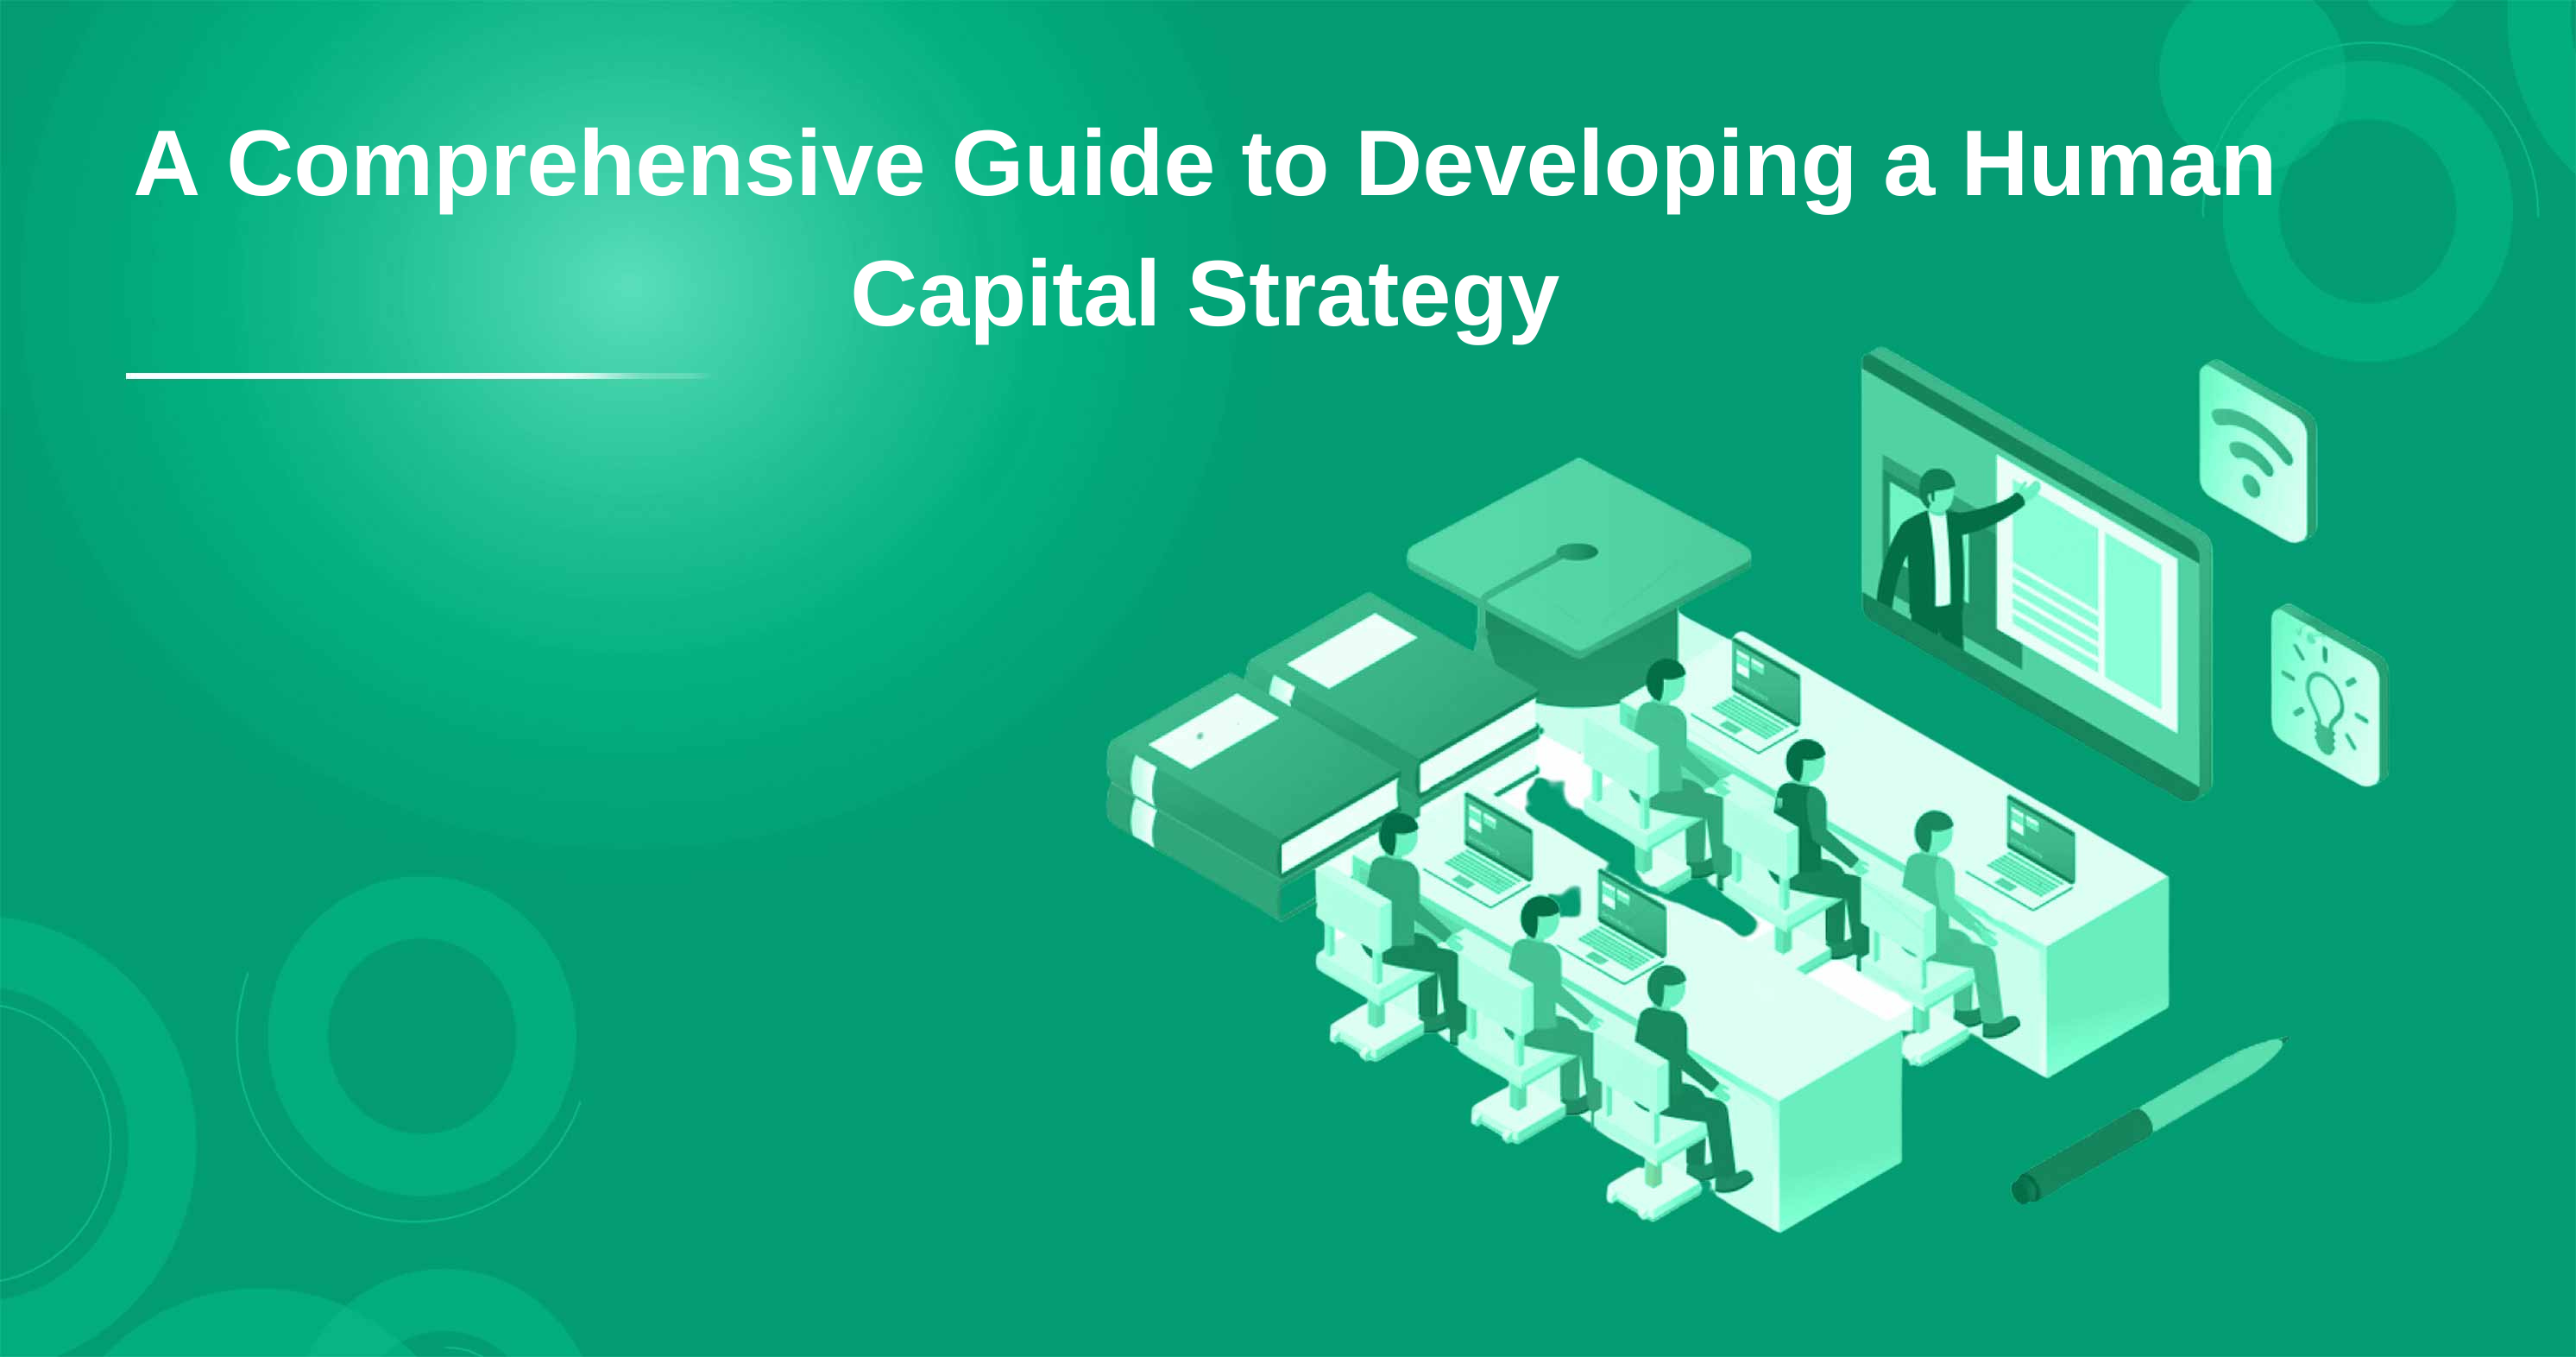 A Comprehensive Guide to Developing a Human Capital Strategy